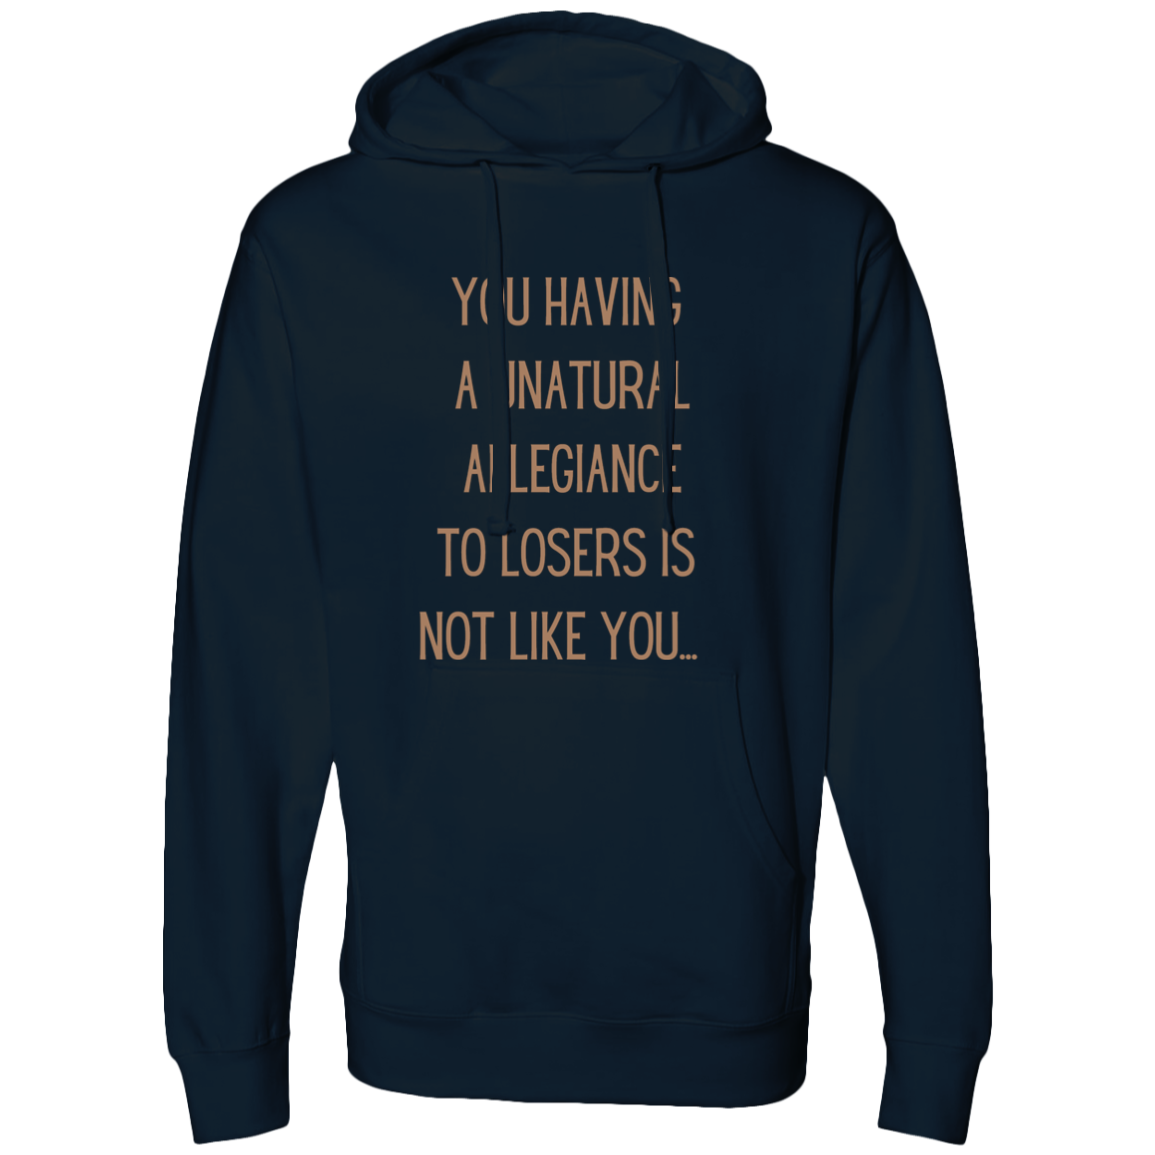 Katt Williams said it best: You having a unatural allegiance to losers is not like you… Hooded Sweatshirt